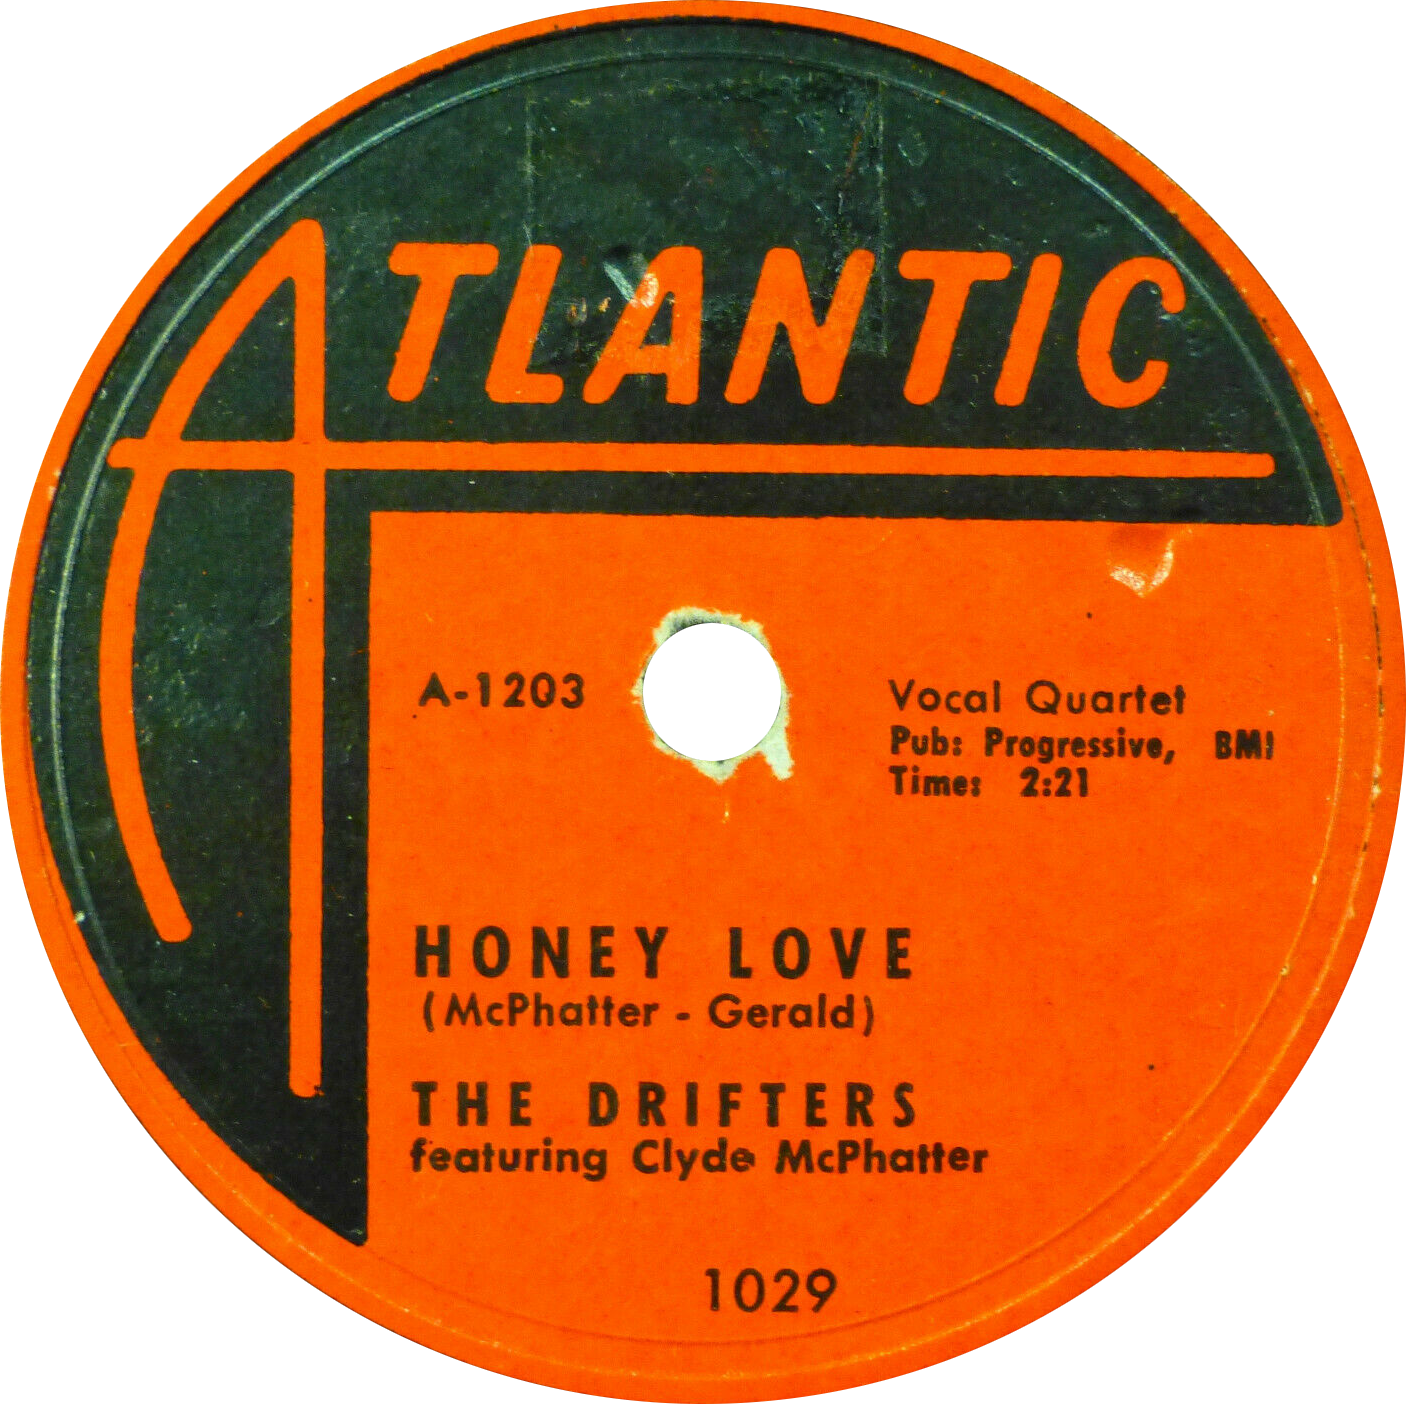 https://upload.wikimedia.org/wikipedia/commons/0/05/Honey_Love_by_The_Drifters_US_10-inch_78_RPM_Side-A.png